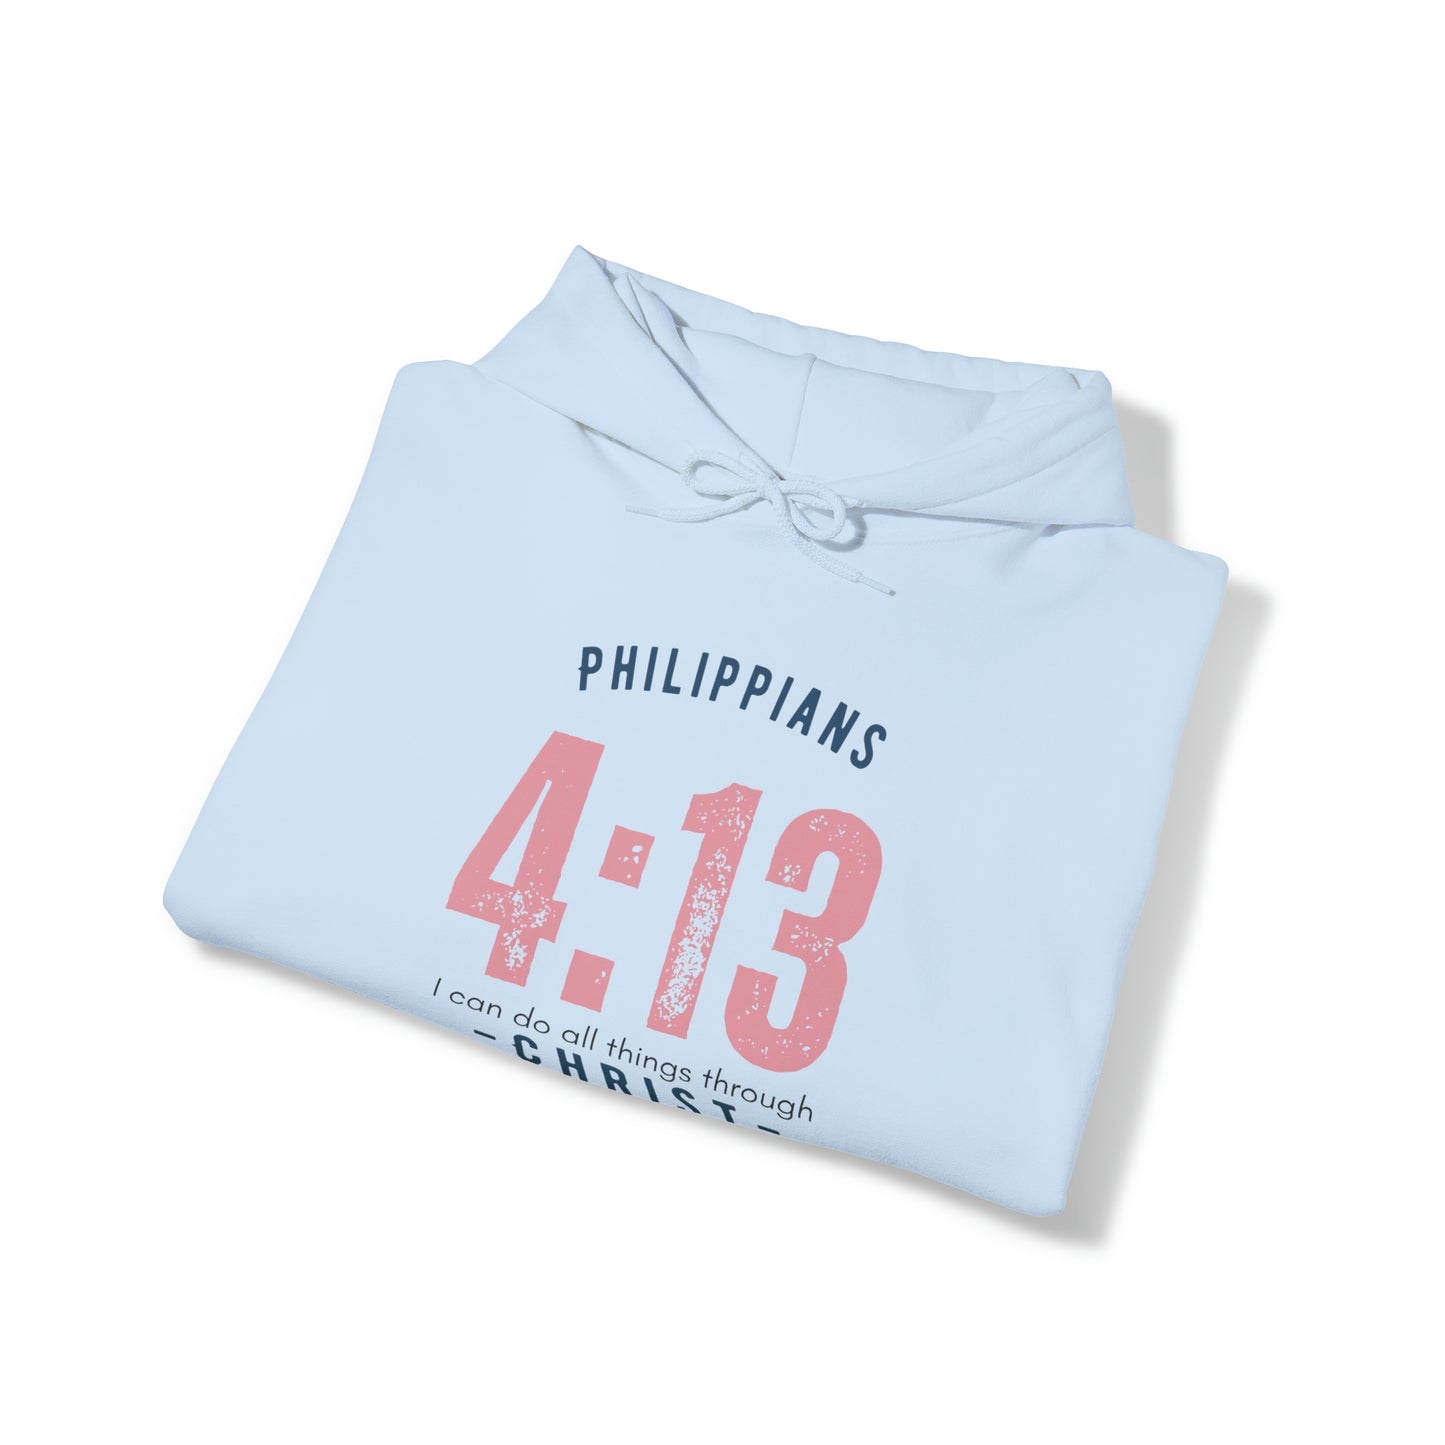 Philippians 4:13 All Things Through Christ, Heavy Blend™ Christian Hoodie for Men and Women